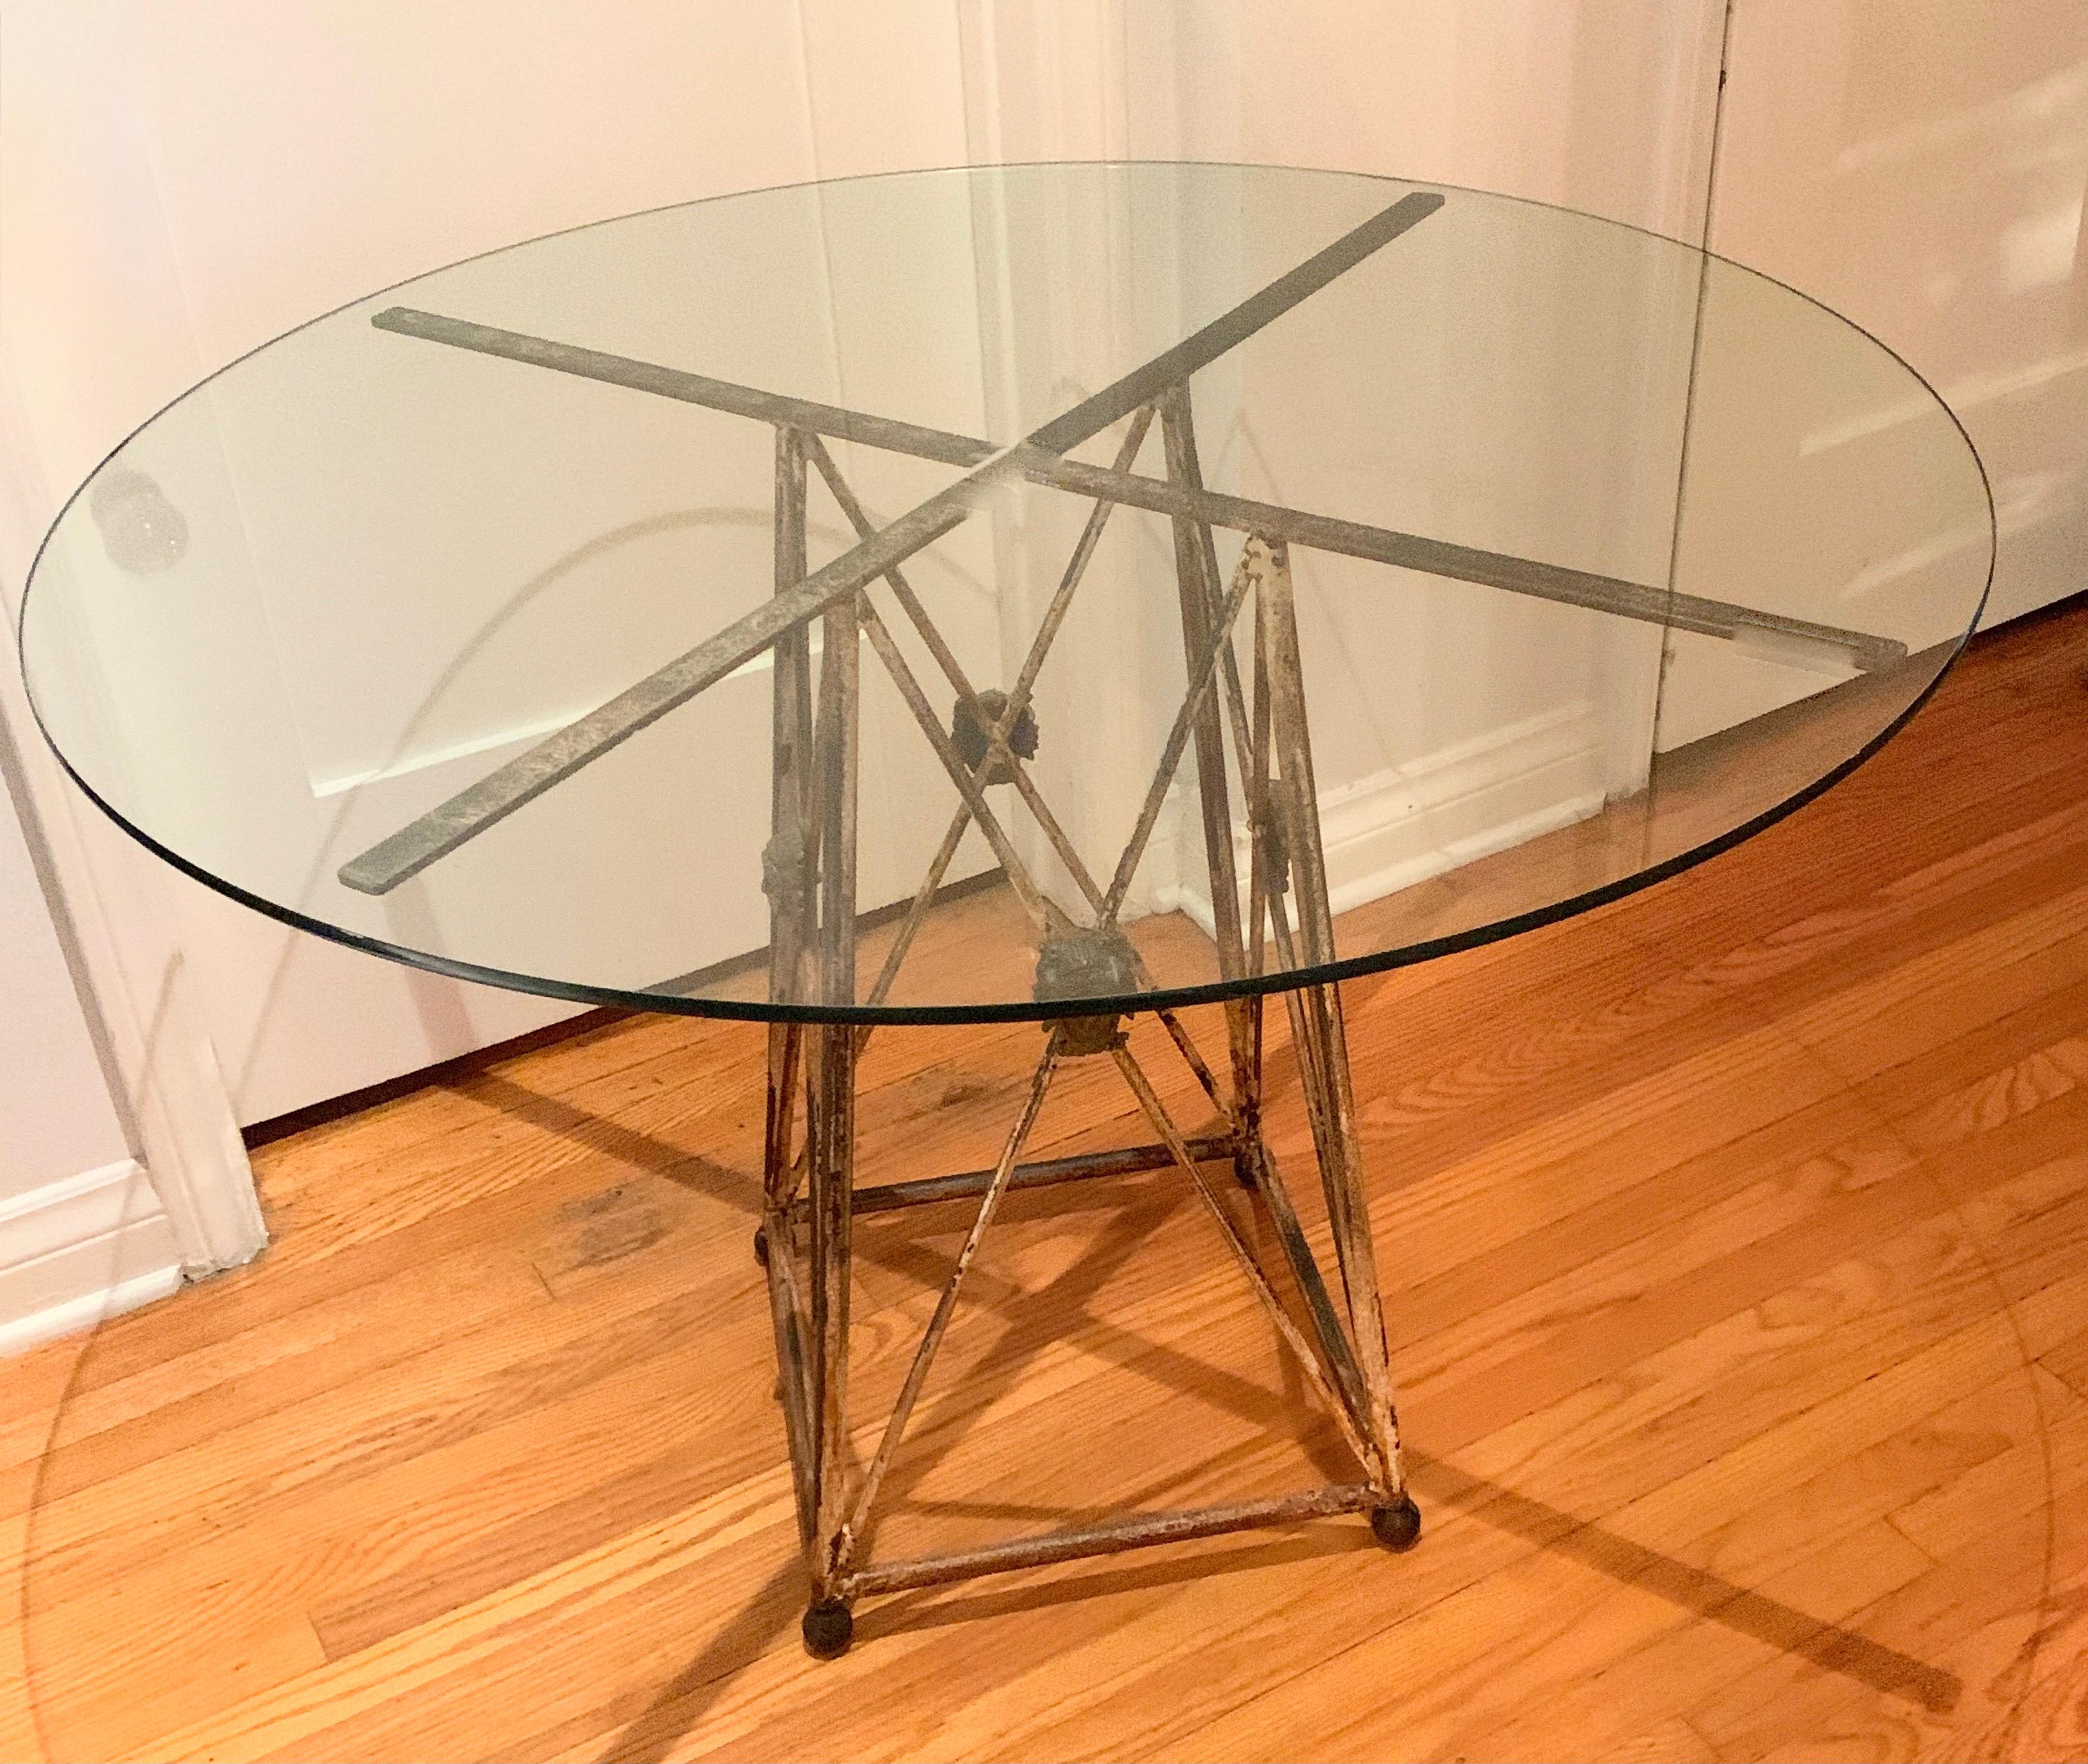 Italian patinated metal base center or dining table with Medusa Heads, with glass top. The architectural criss cross form of this table is wonderfully aged, with Medusa heads, in the style of Versace, at each intersection. We have placed glass top